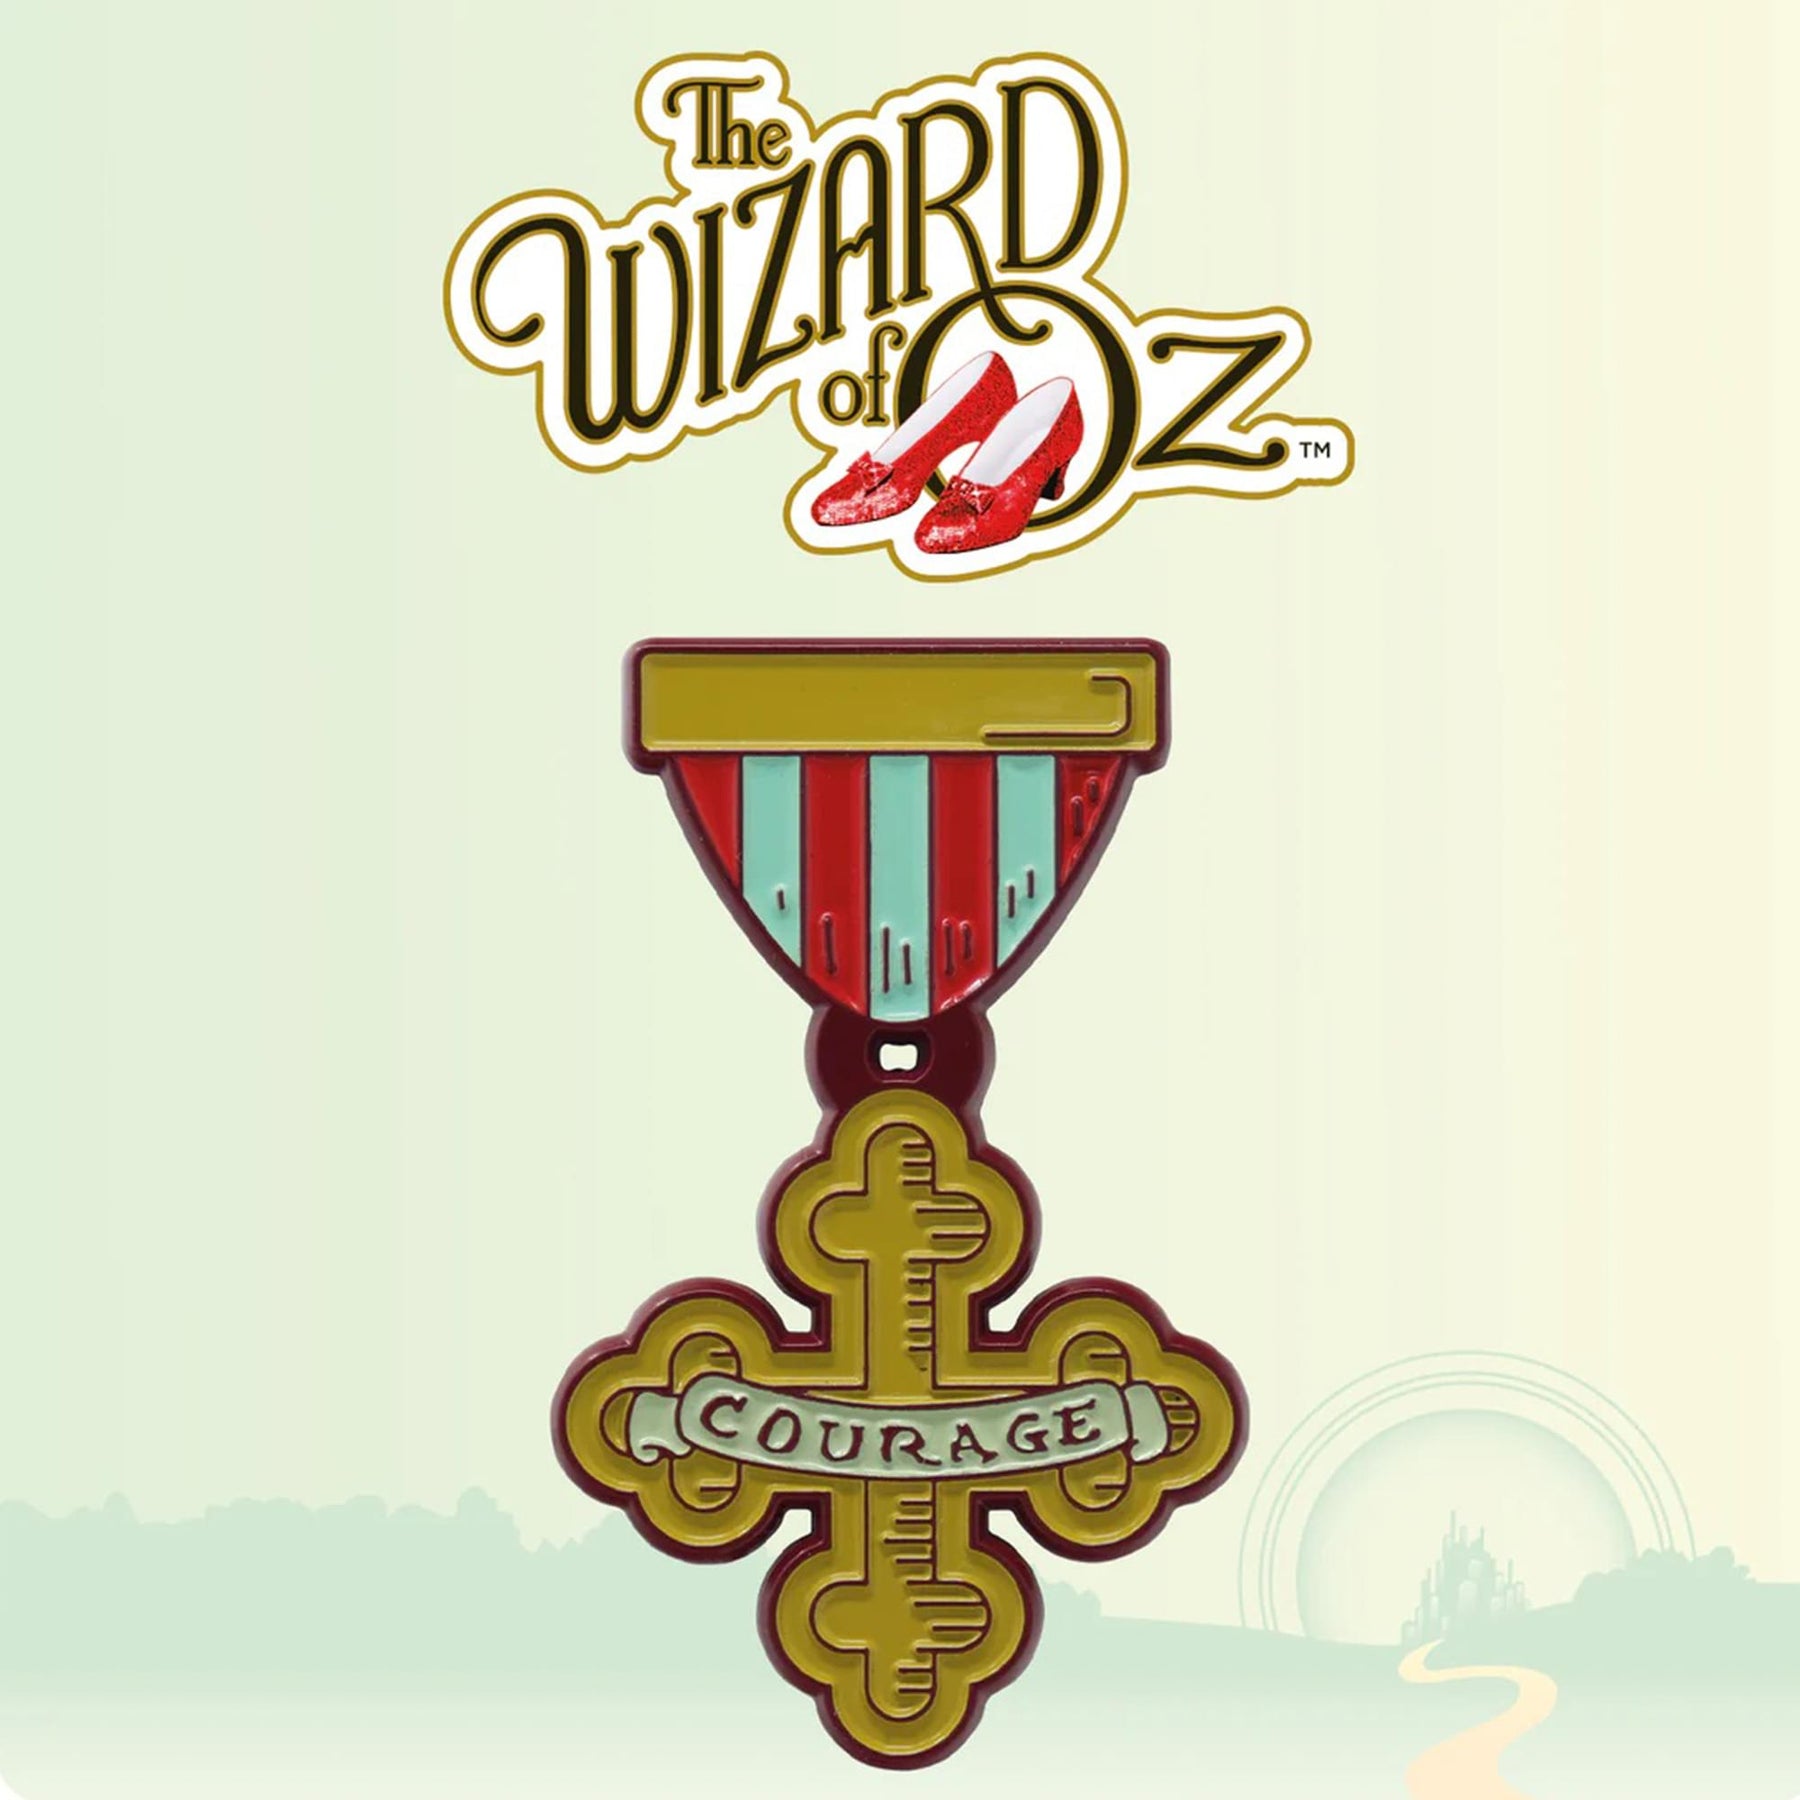 The Wizard of Oz Limited Edition Courage Medal Pin Badge